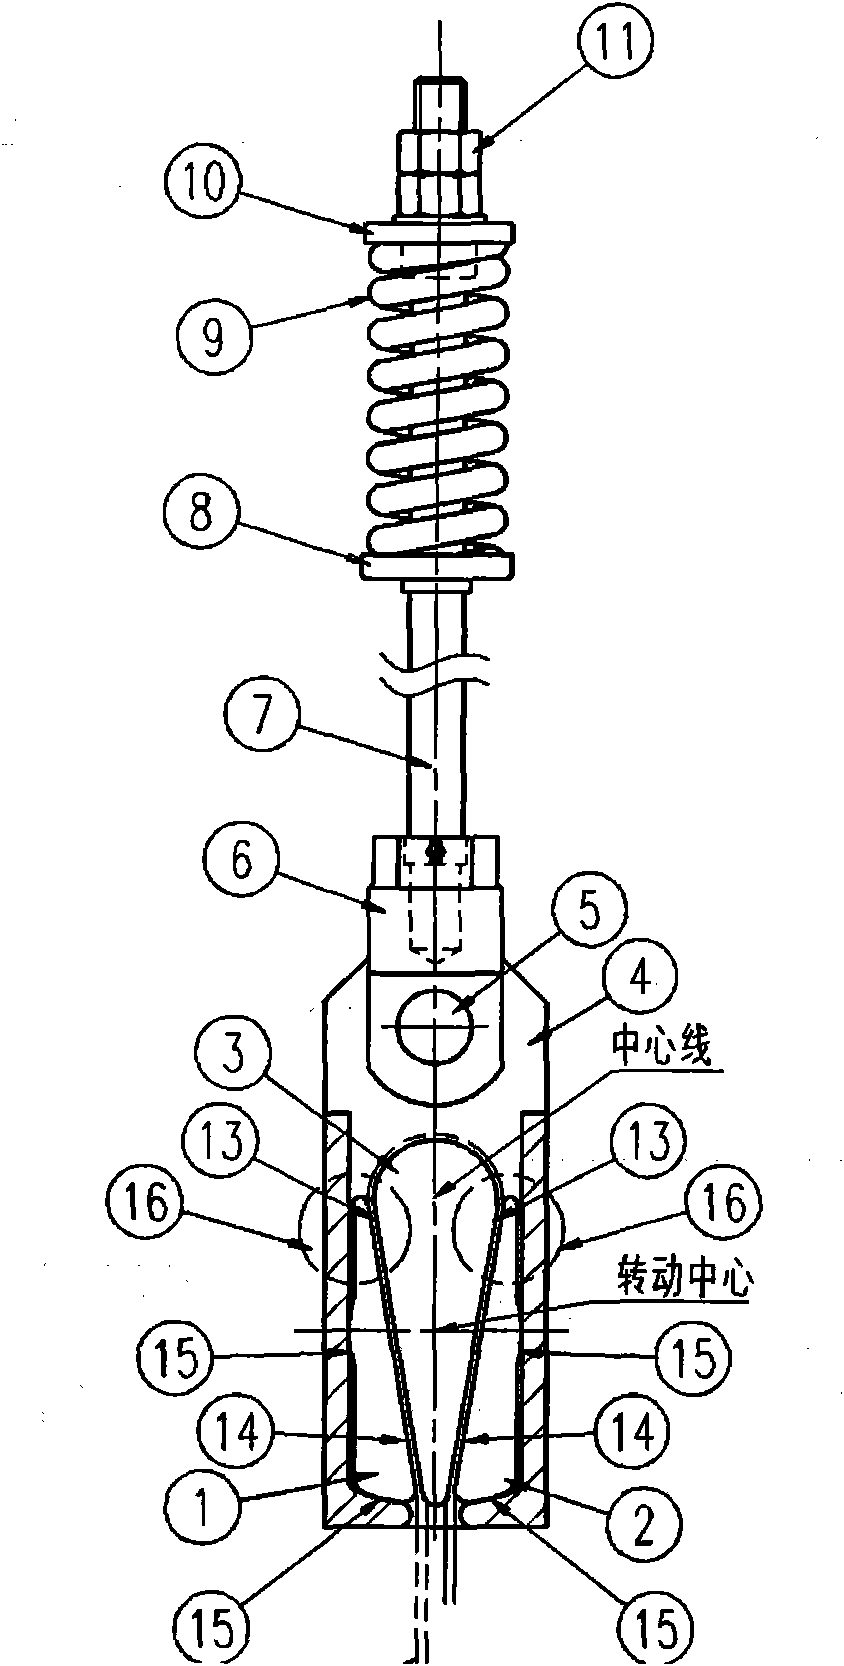 Terminating set used for elevator device